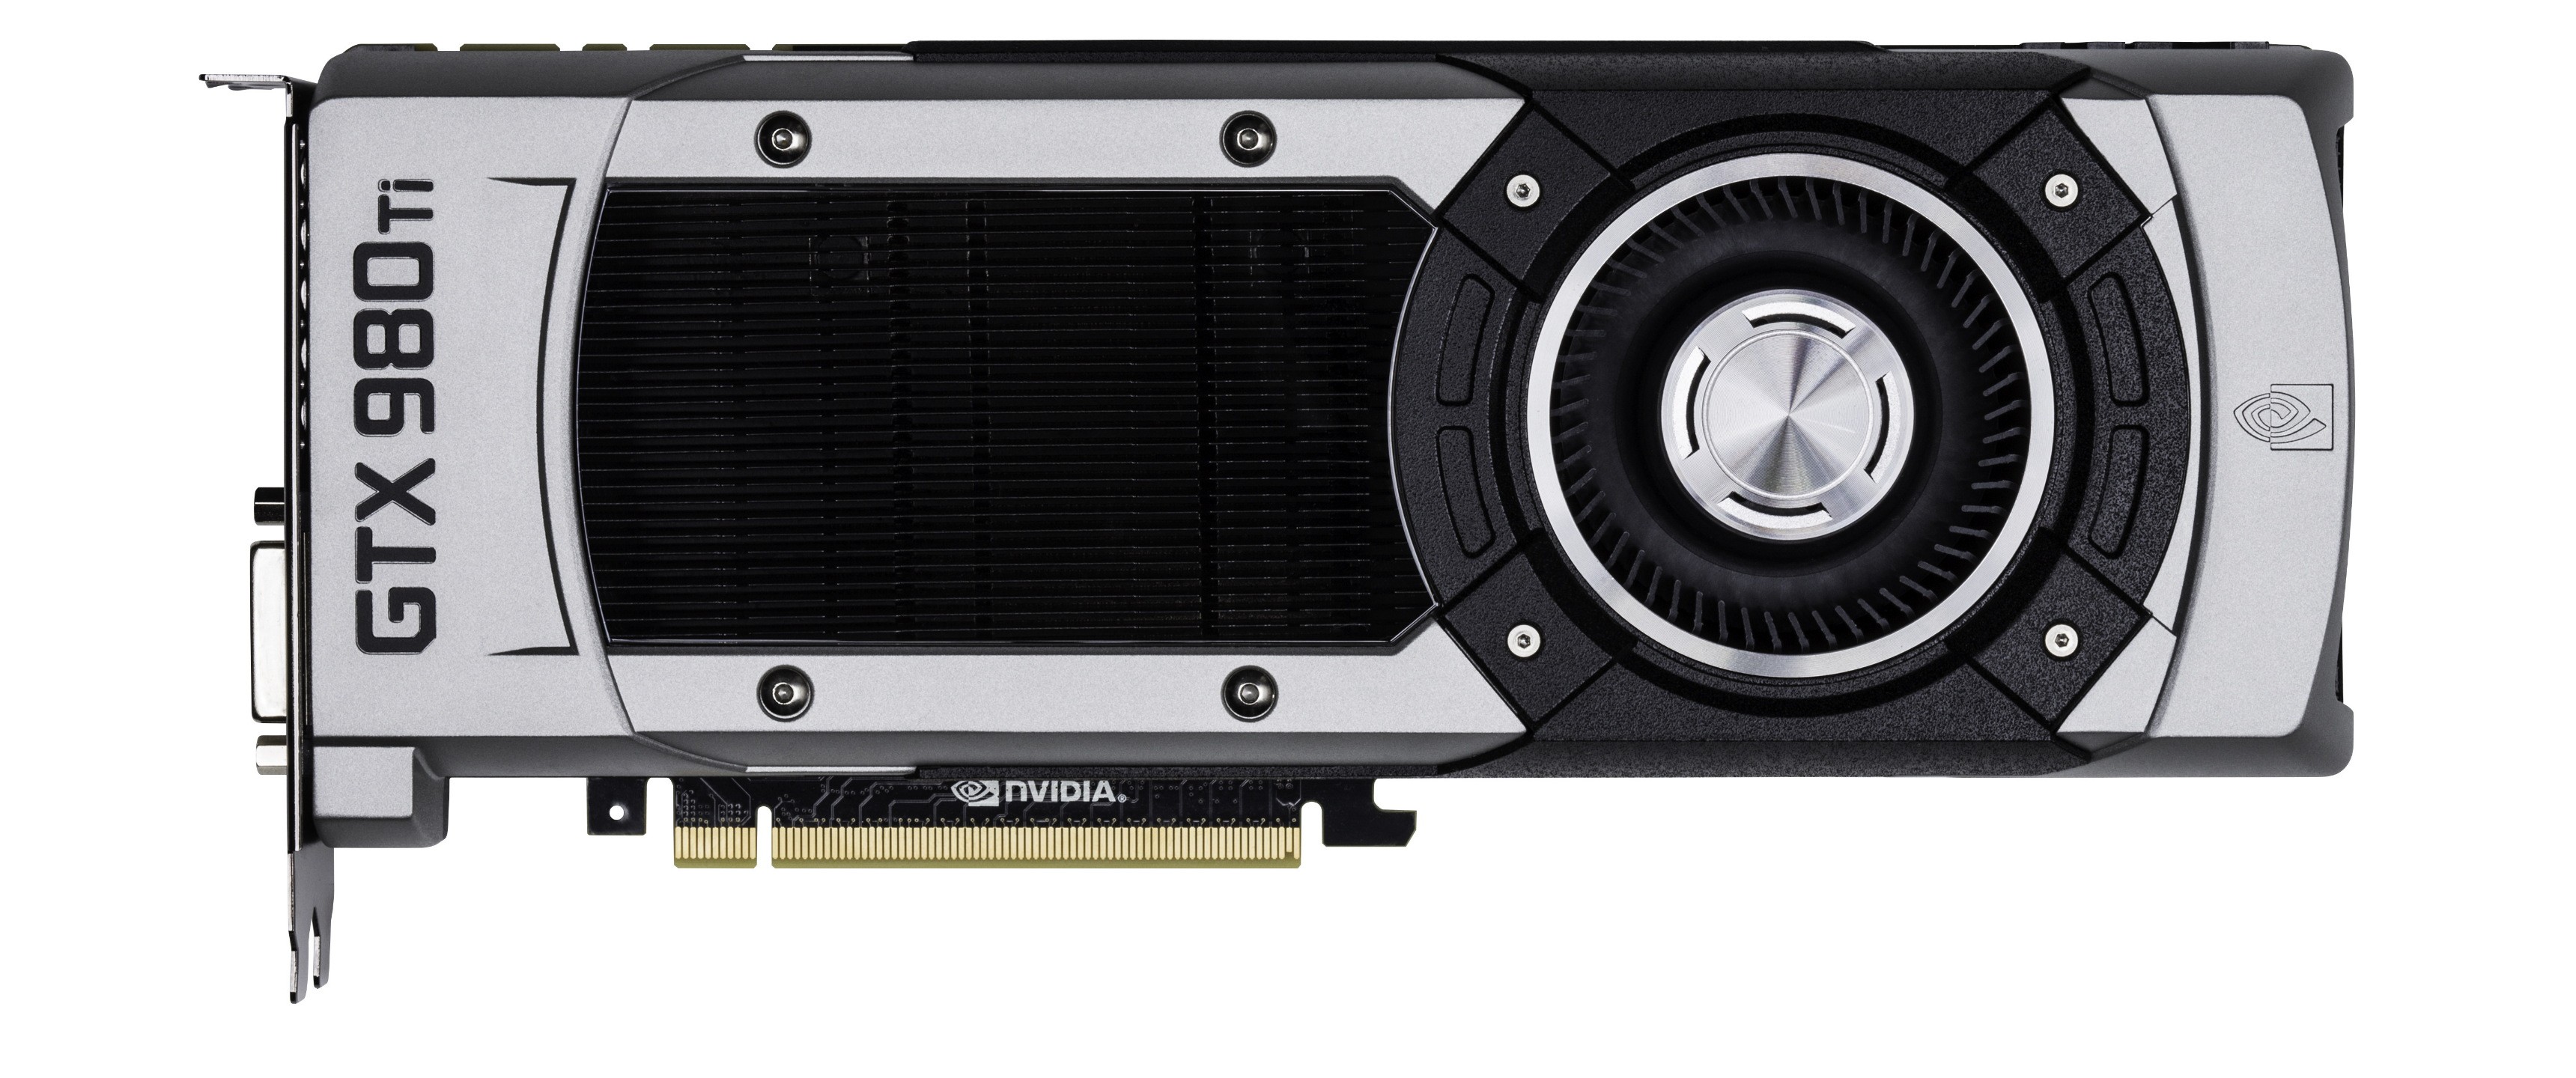 Nvidia GeForce Graphics Card Technology PC Gaming Hardware 3440x1440